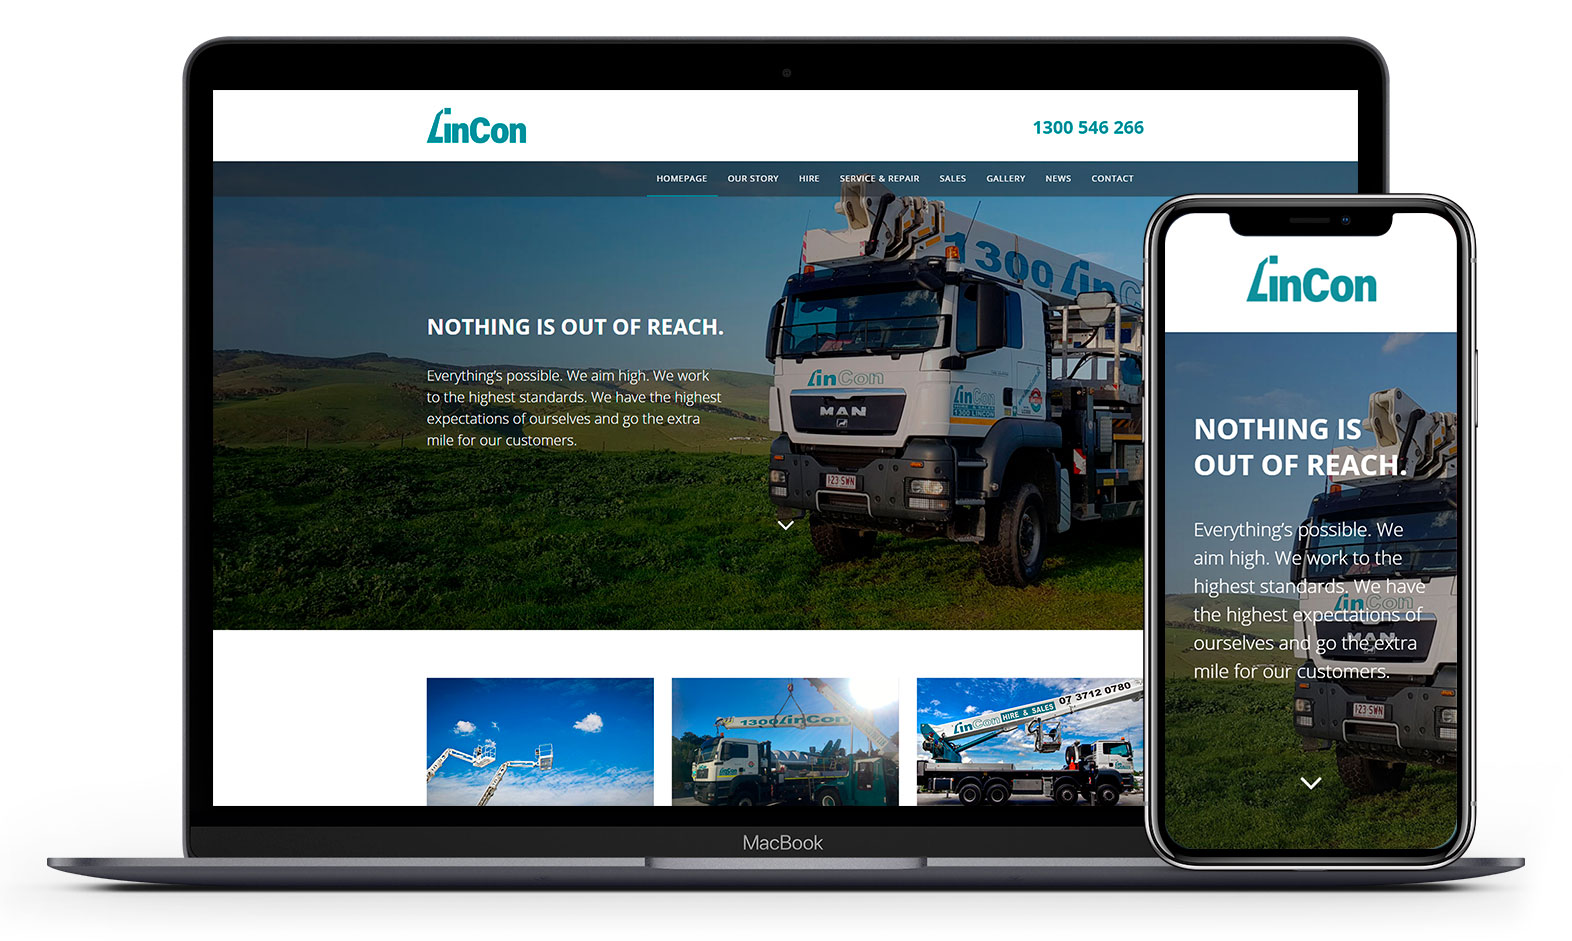 Lincon hire's website design displayed responsive devices